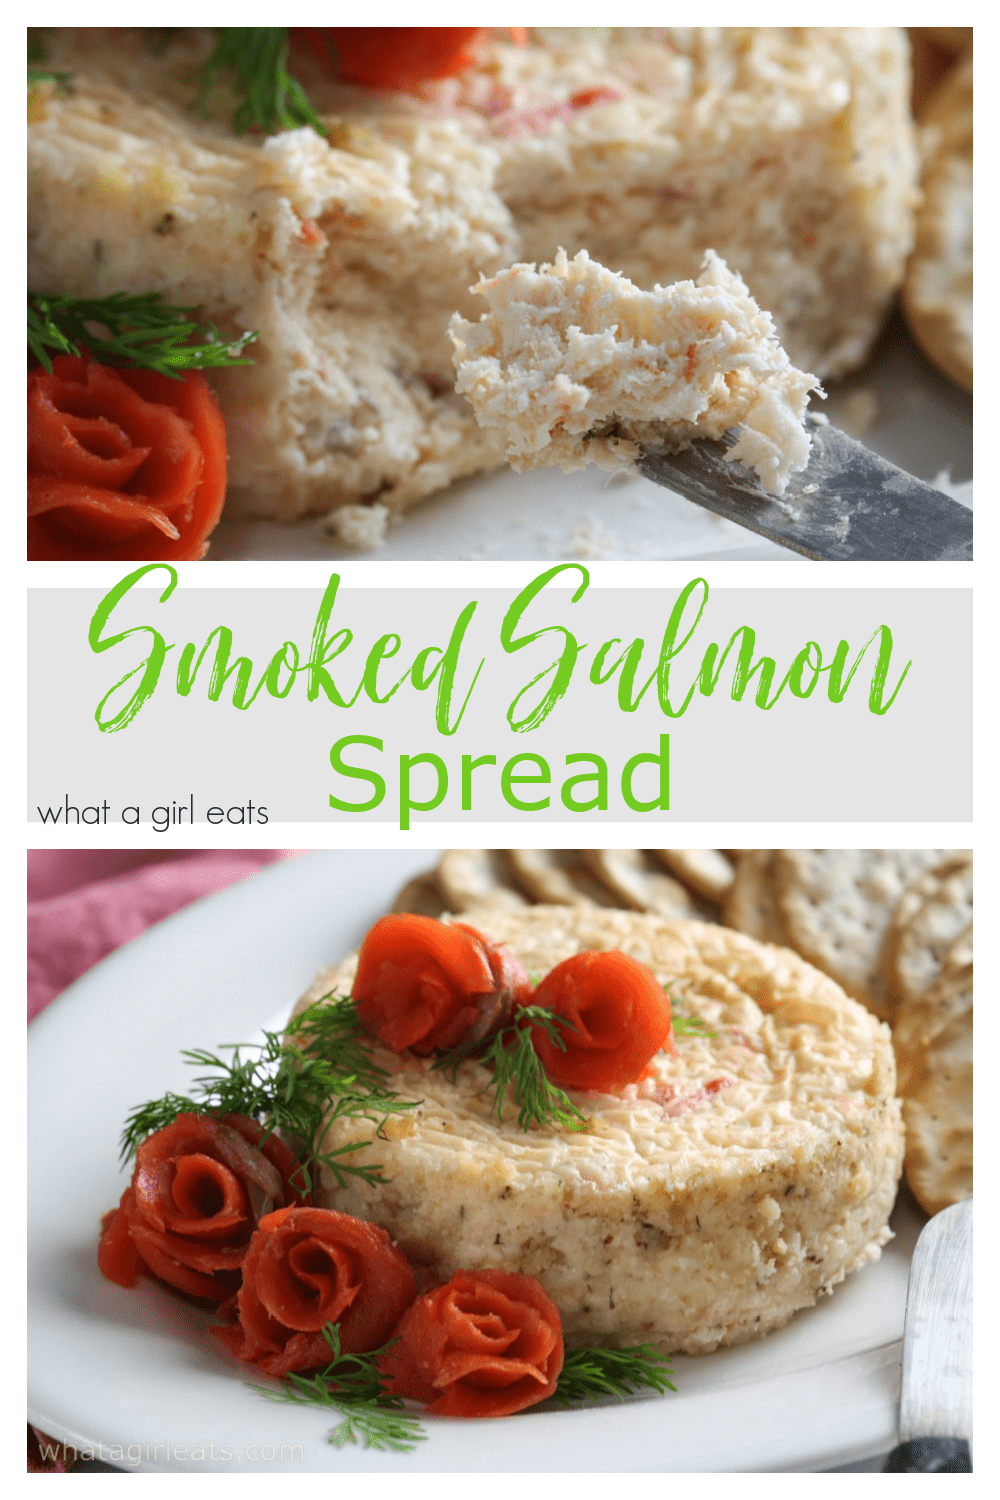 This smoked salmon spread is an excellent addition to any cocktail party or holiday dinner. Also called a "savory cheesecake", it is a blend of smoked salmon, Gruyere cheese, and fresh dill.